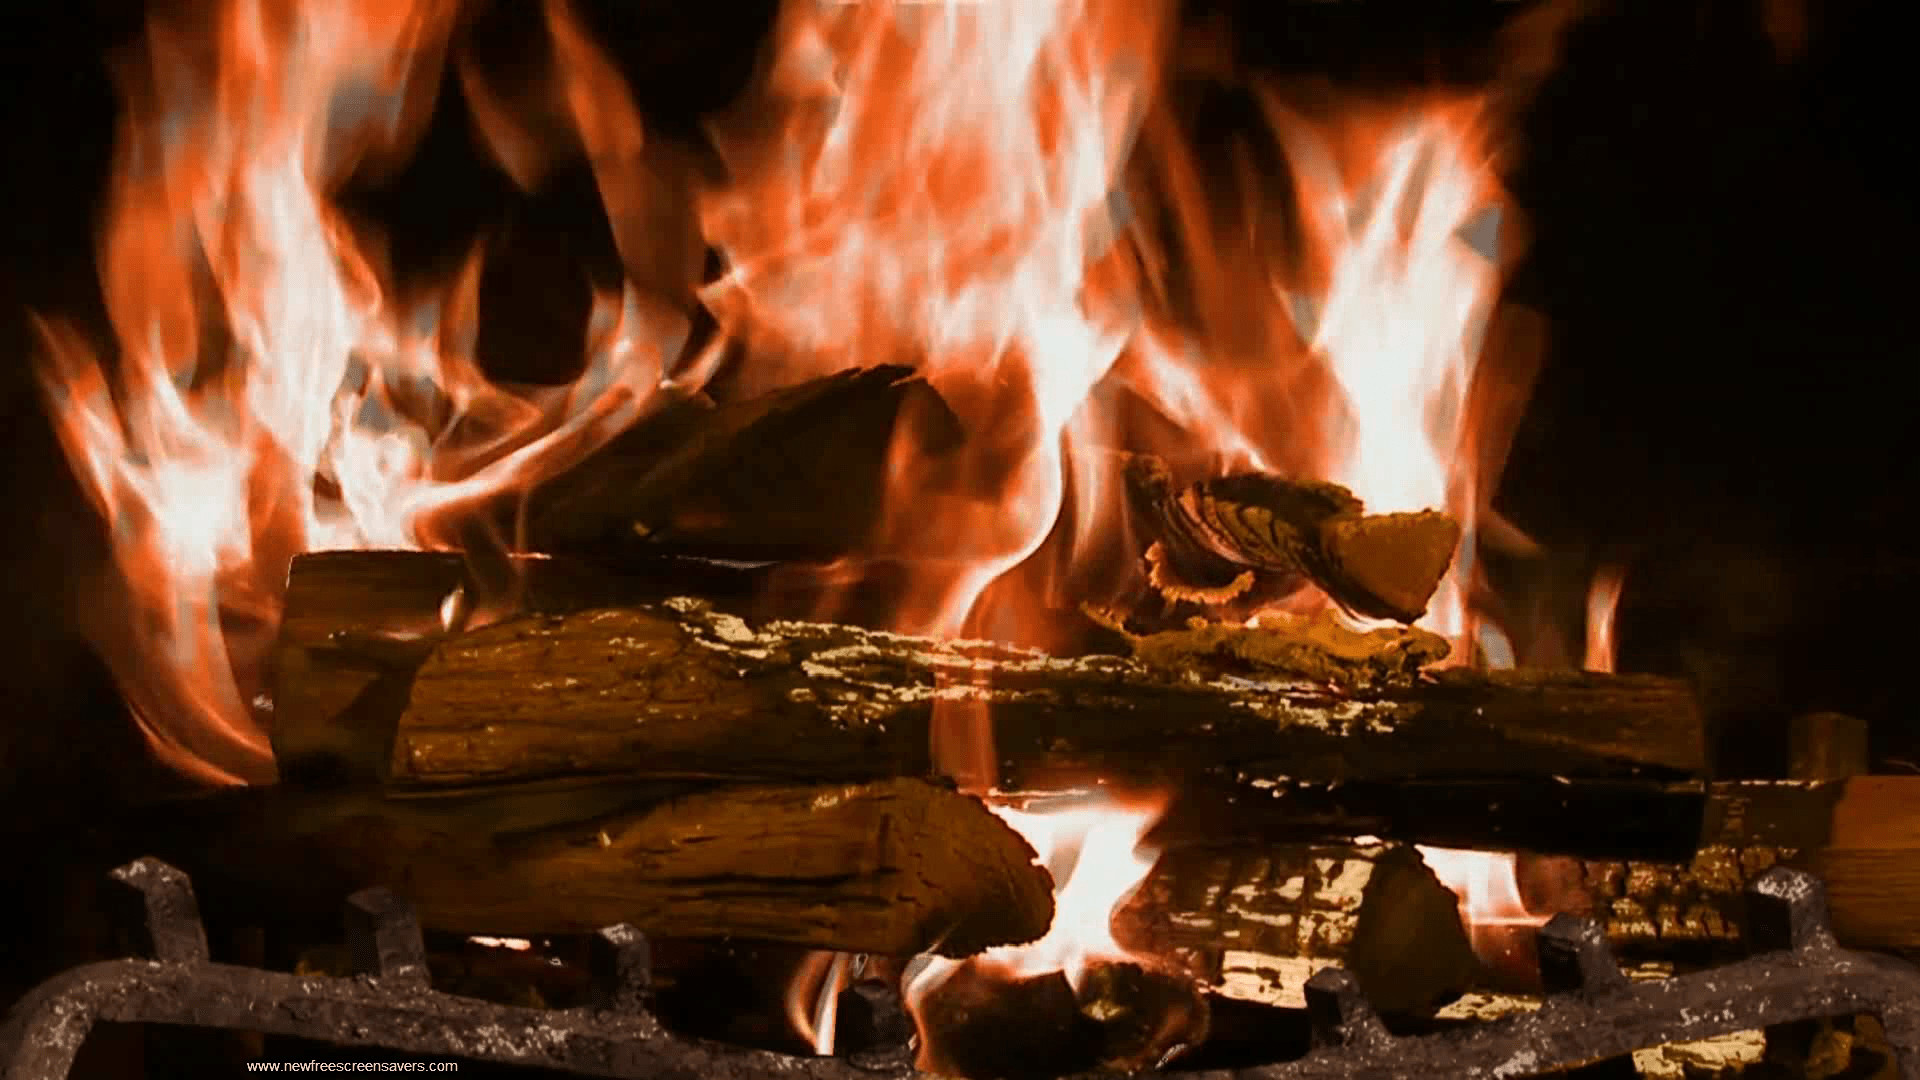 1920x1080  Fireplace Screen Savers Part - 49: Amazing Free Fireplace  Screensaver Wallpaper Of Awesome Full Screen